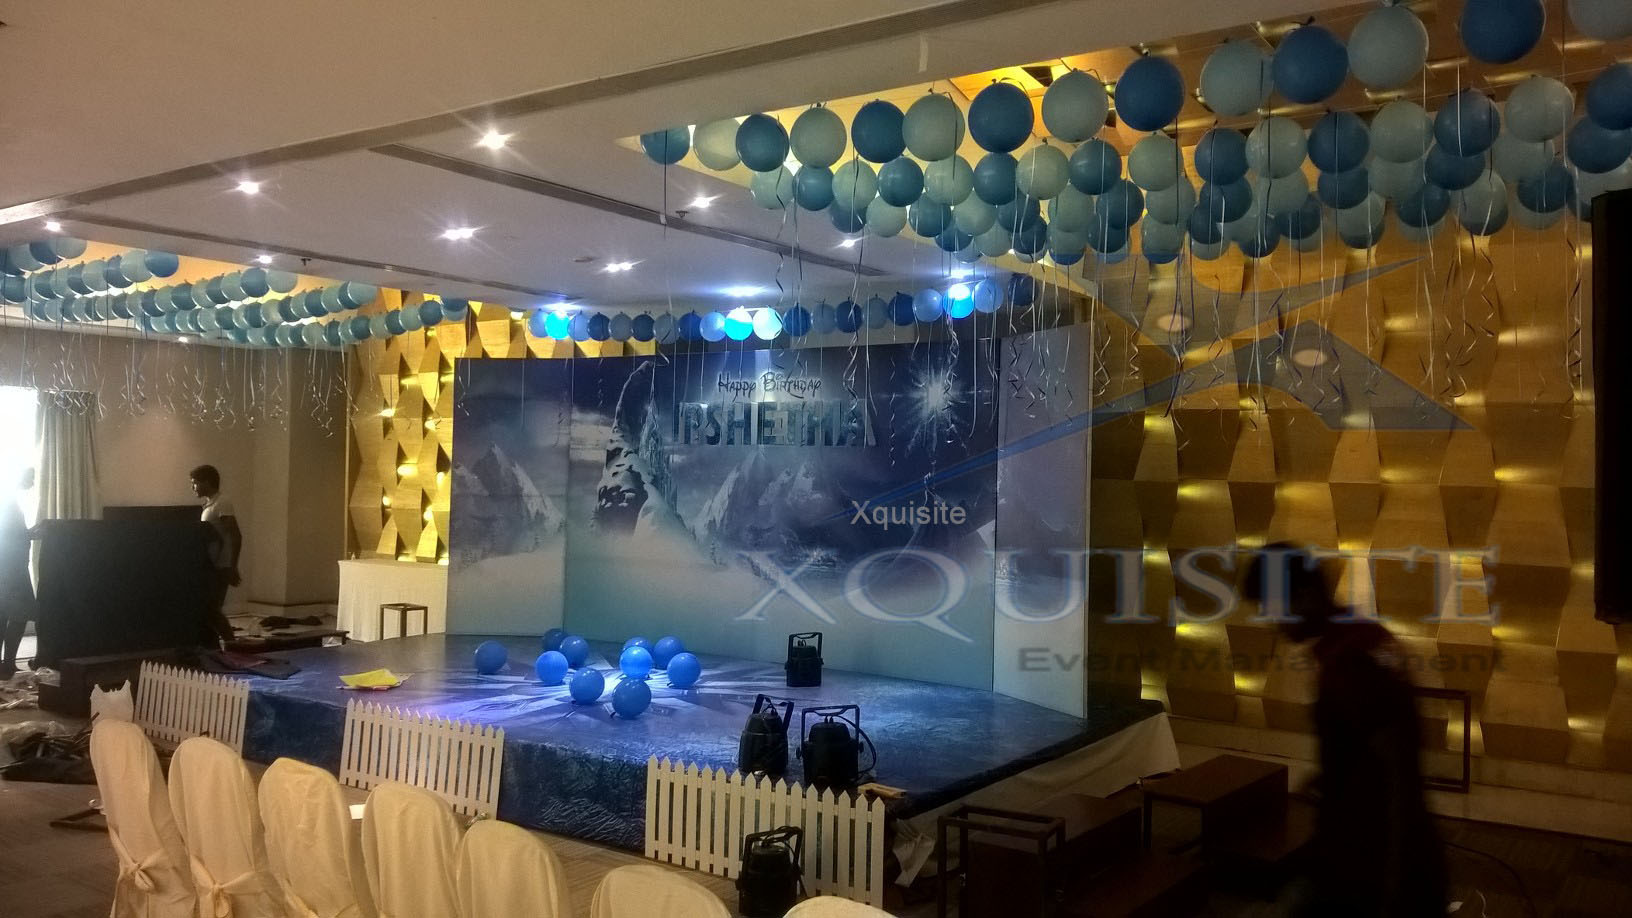 Theme based event conducted by Xquisite Event Management.